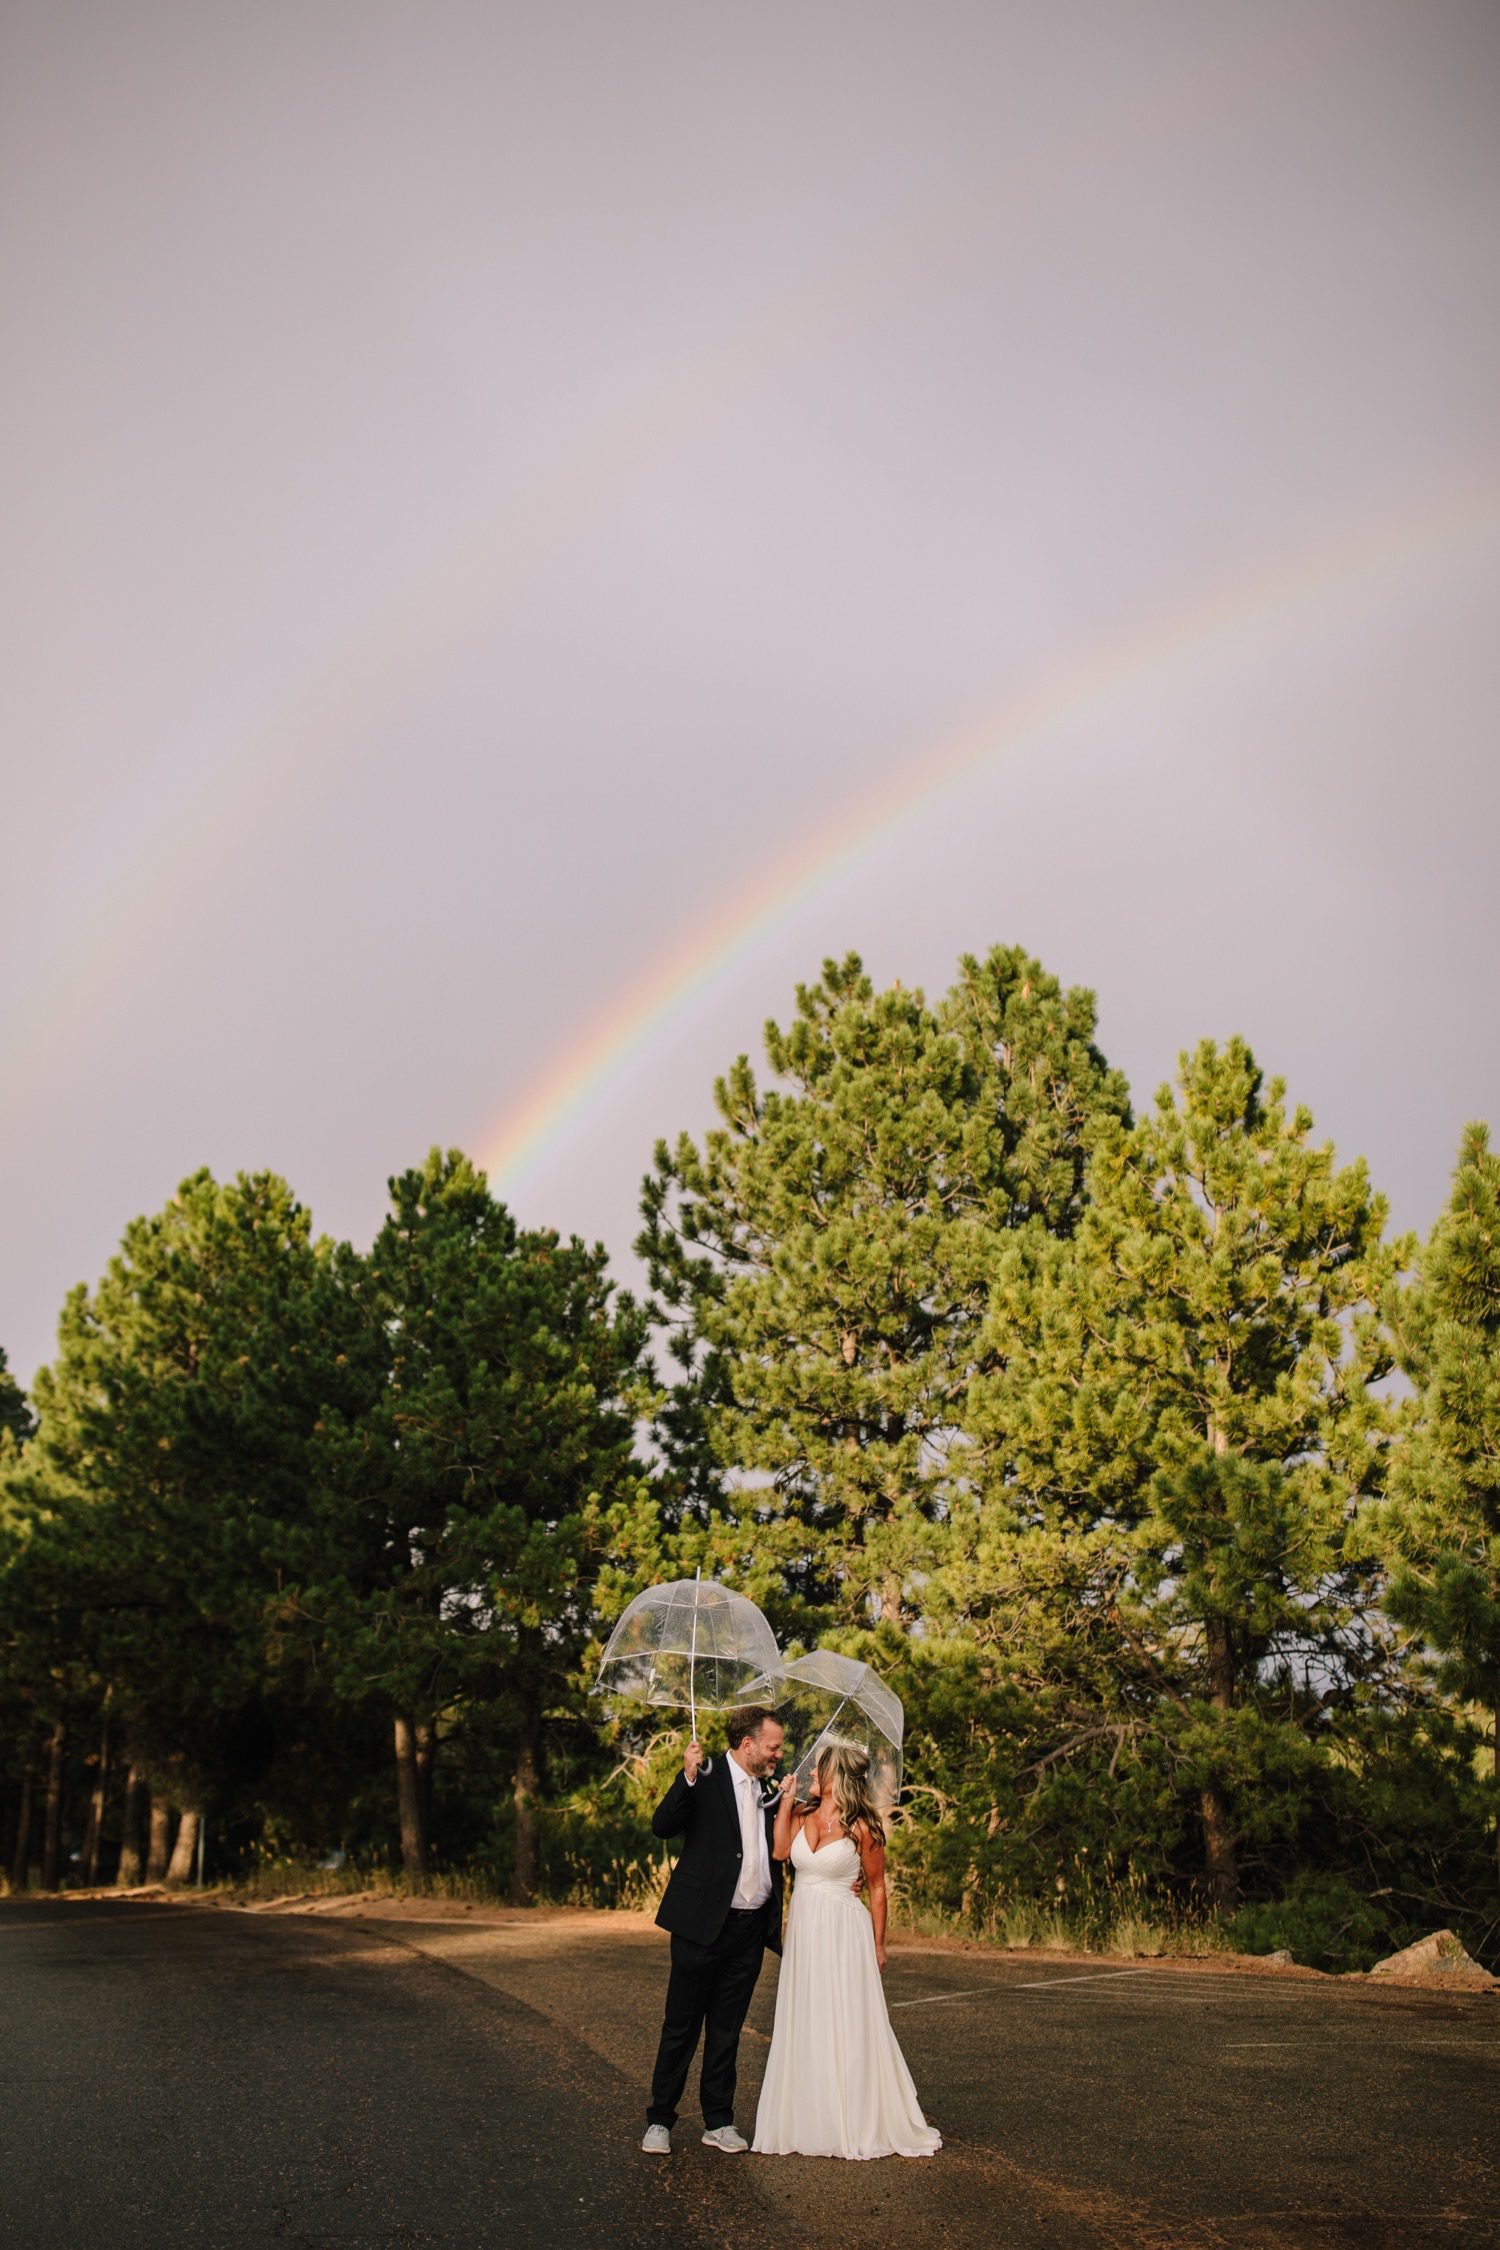 Bride and groom with double rainbow and clear umbrellas looking at each other